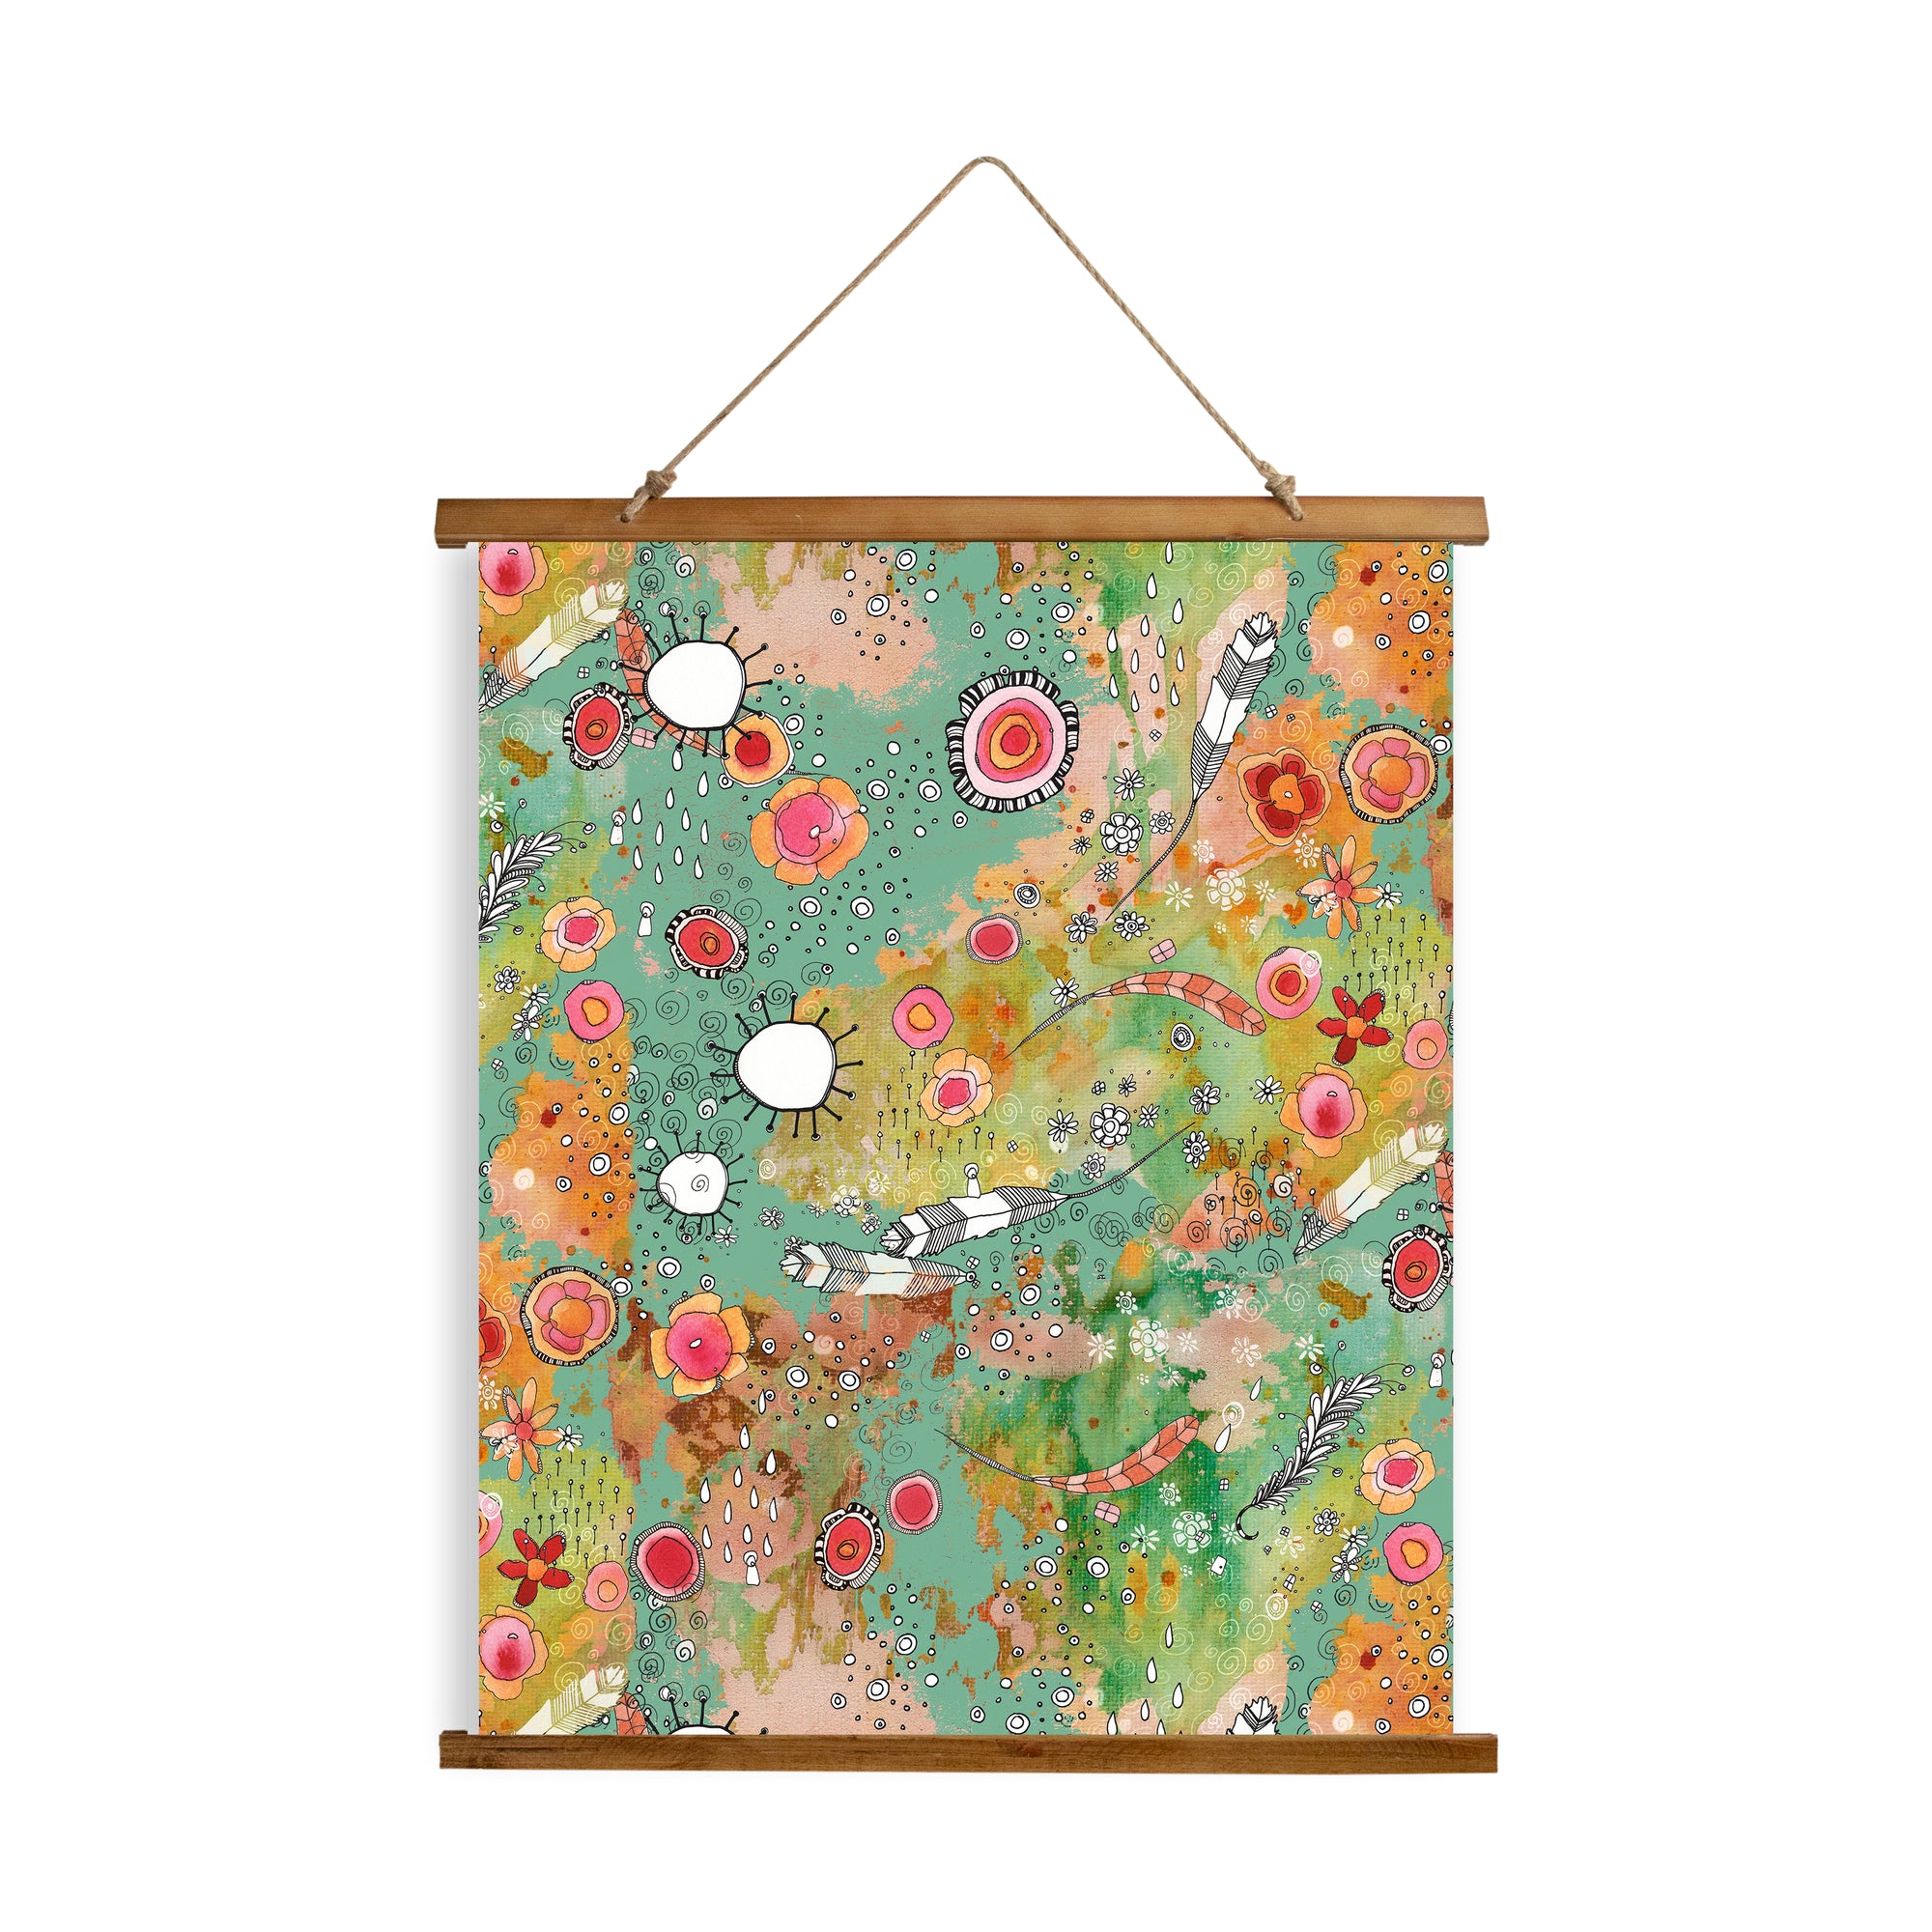 Whimsical Wood Slat Tapestry "Feathers Flowers Showers"